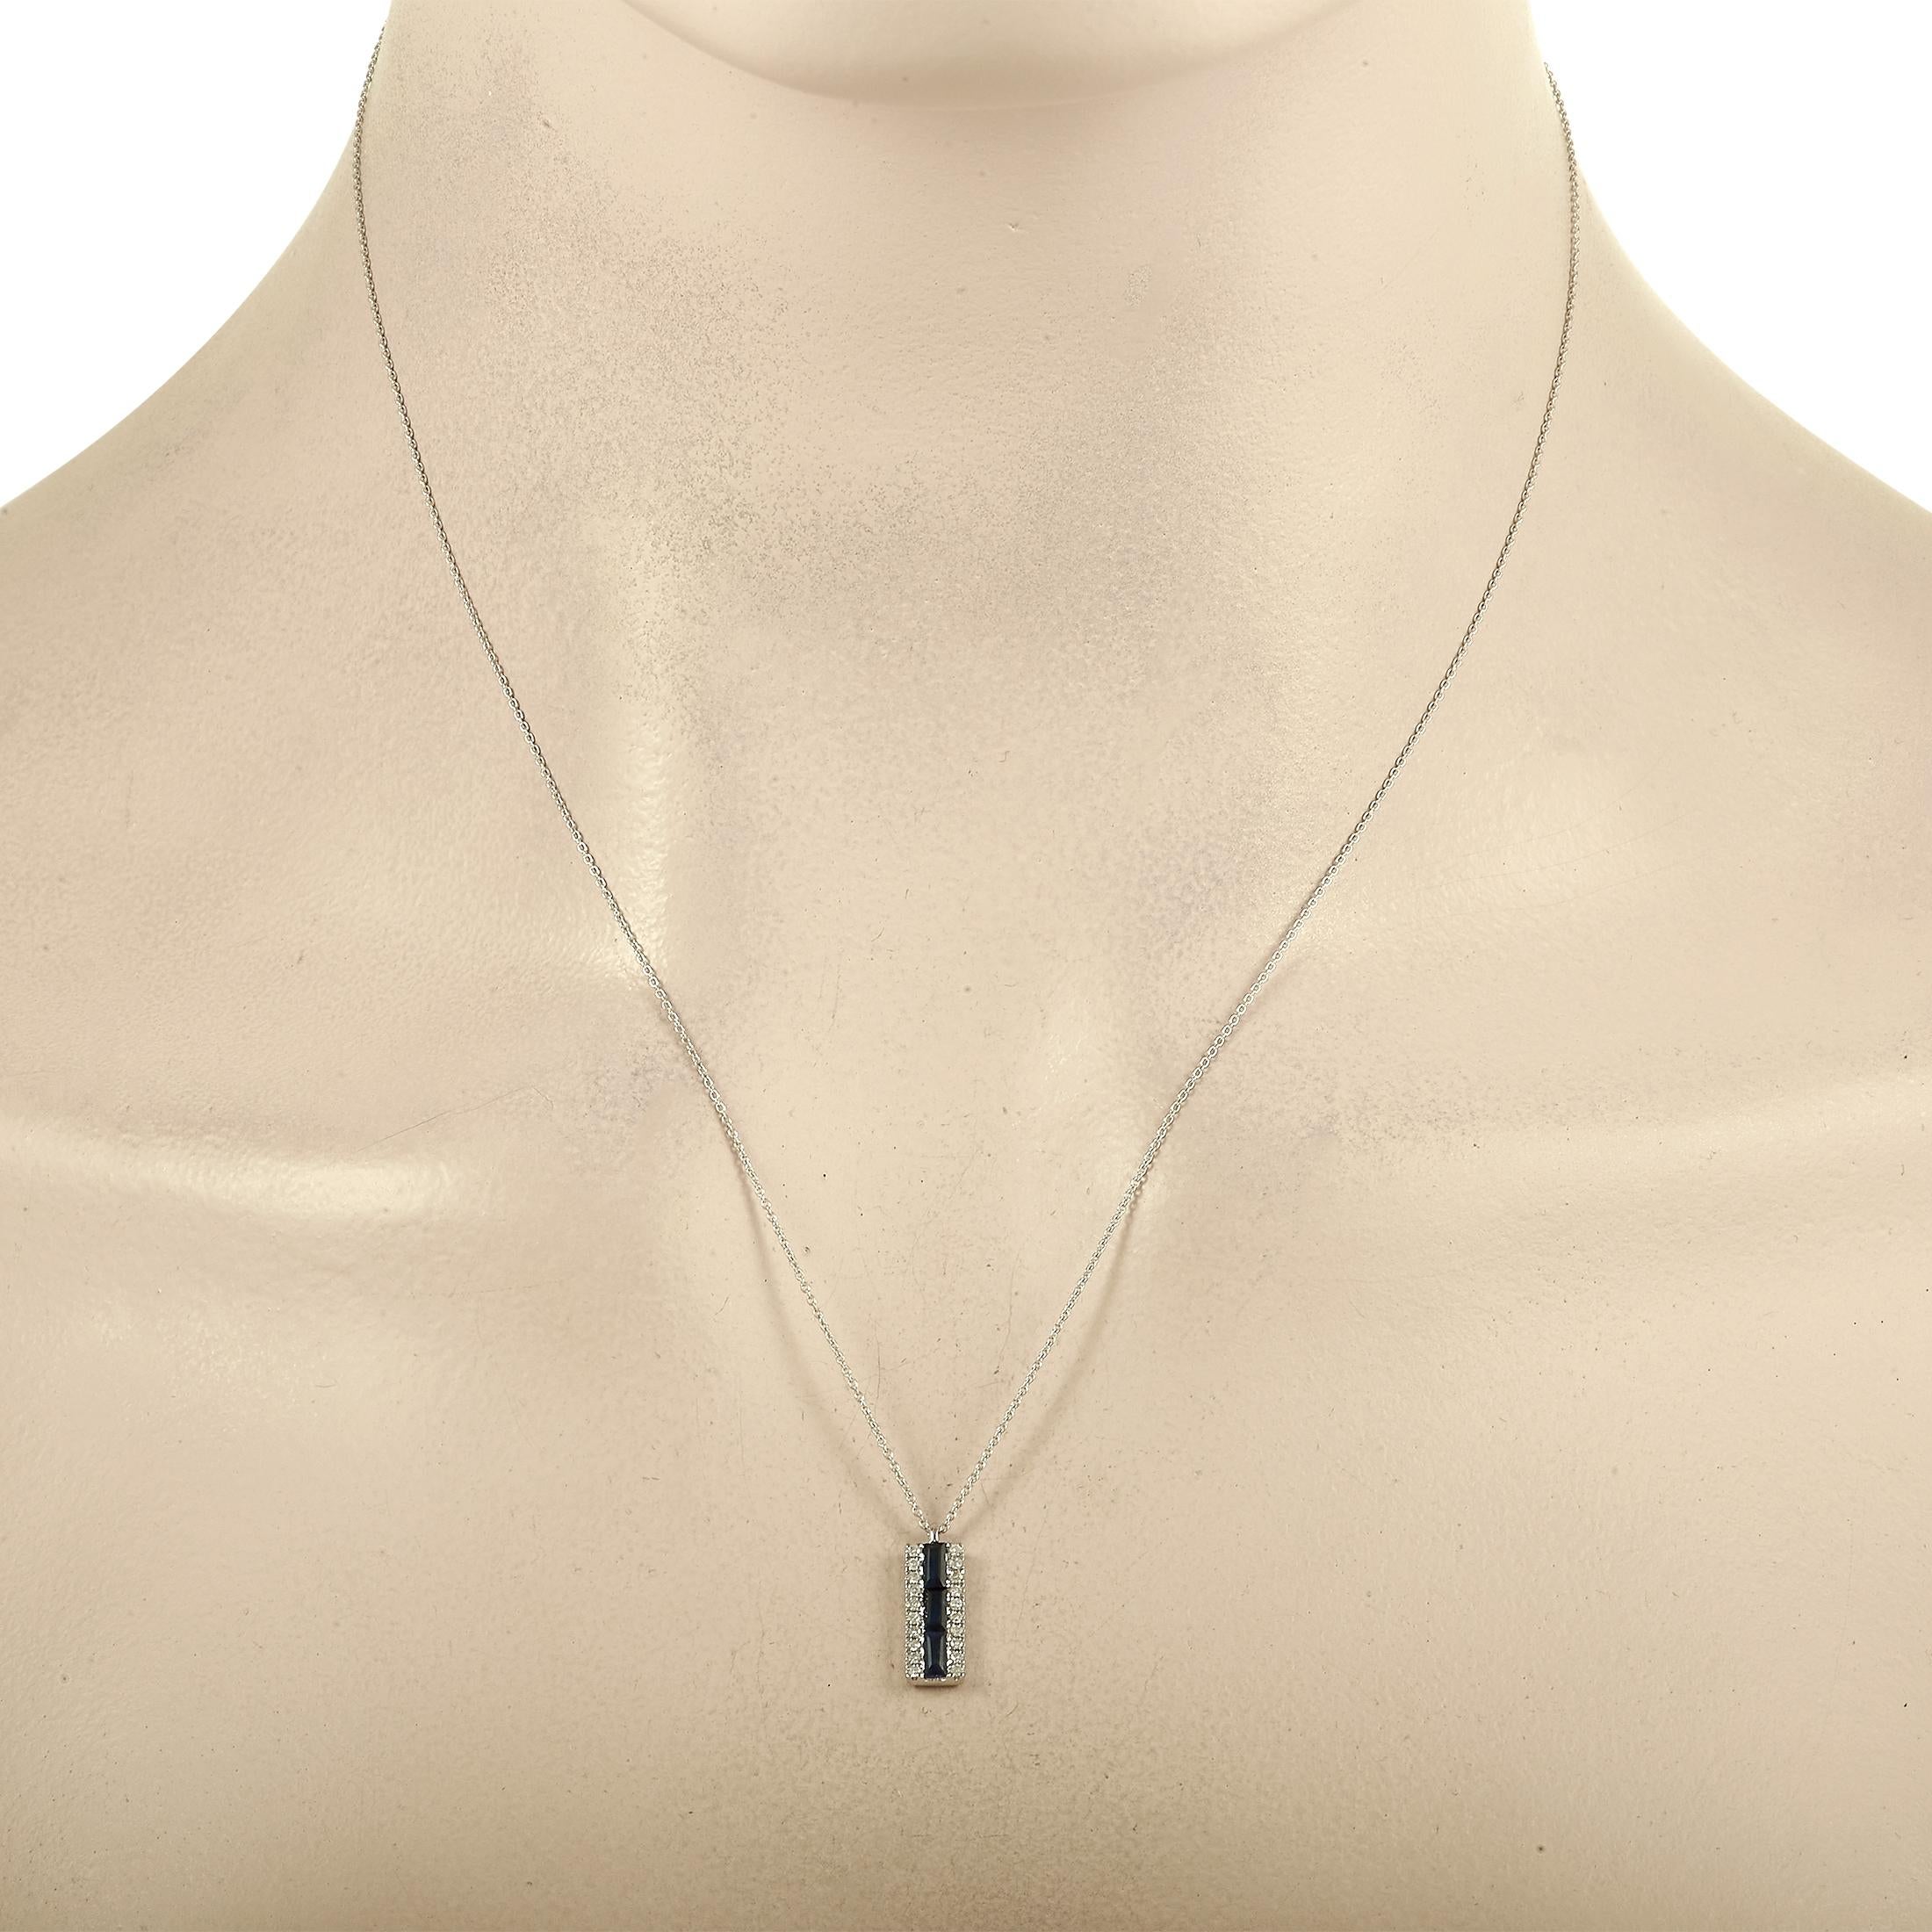 A sleek, rectangular 14K White Gold pendant measuring 0.5” long and 0.25” wide makes this necklace truly timeless. The minimalist design is elevated by a series of central sapphires as well as diamond accents totaling 0.10 carats - all suspended